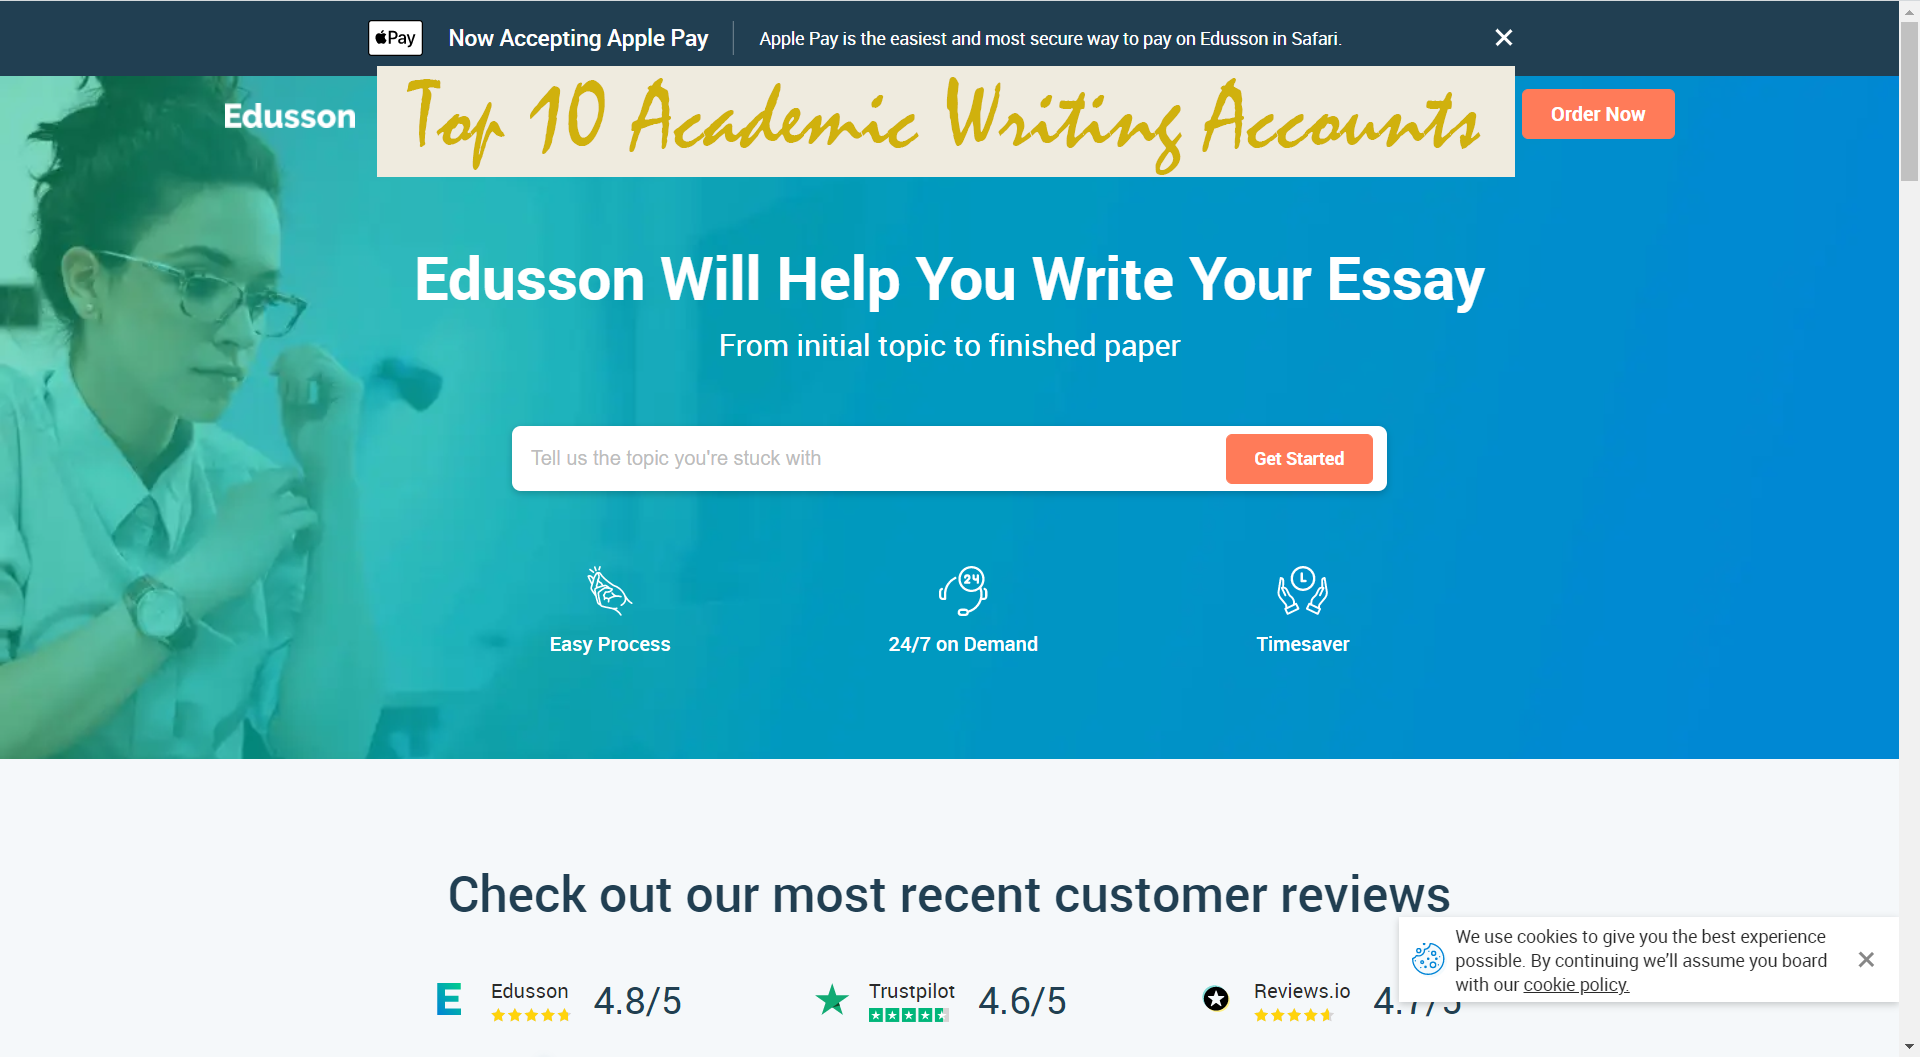 The Top Ten Academic Writing Accounts (Both Hard and Easy to Open)